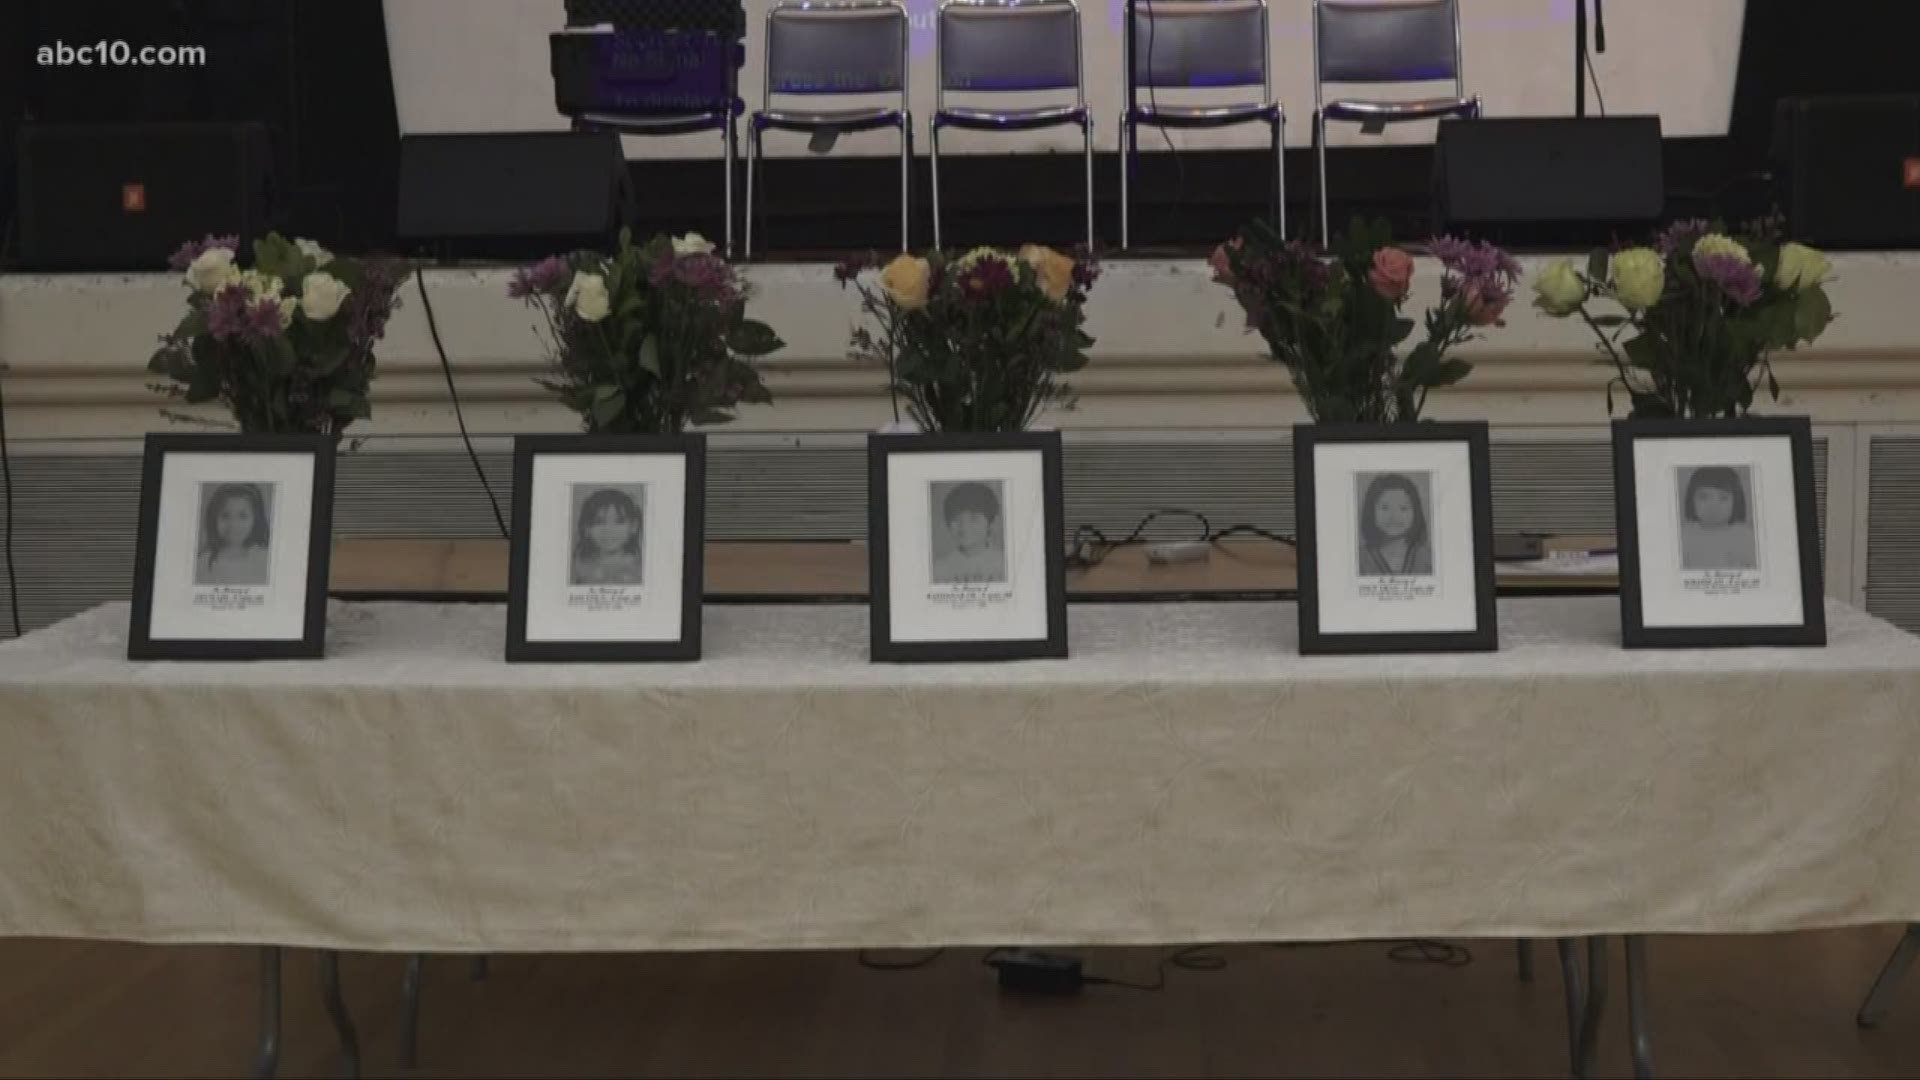 Hundreds of people came together at the Stockton Memorial Civic Auditorium to remember the 30-year anniversary of Cleveland Elementary School shootings. Survivors of the shooting, including former students, spoke.